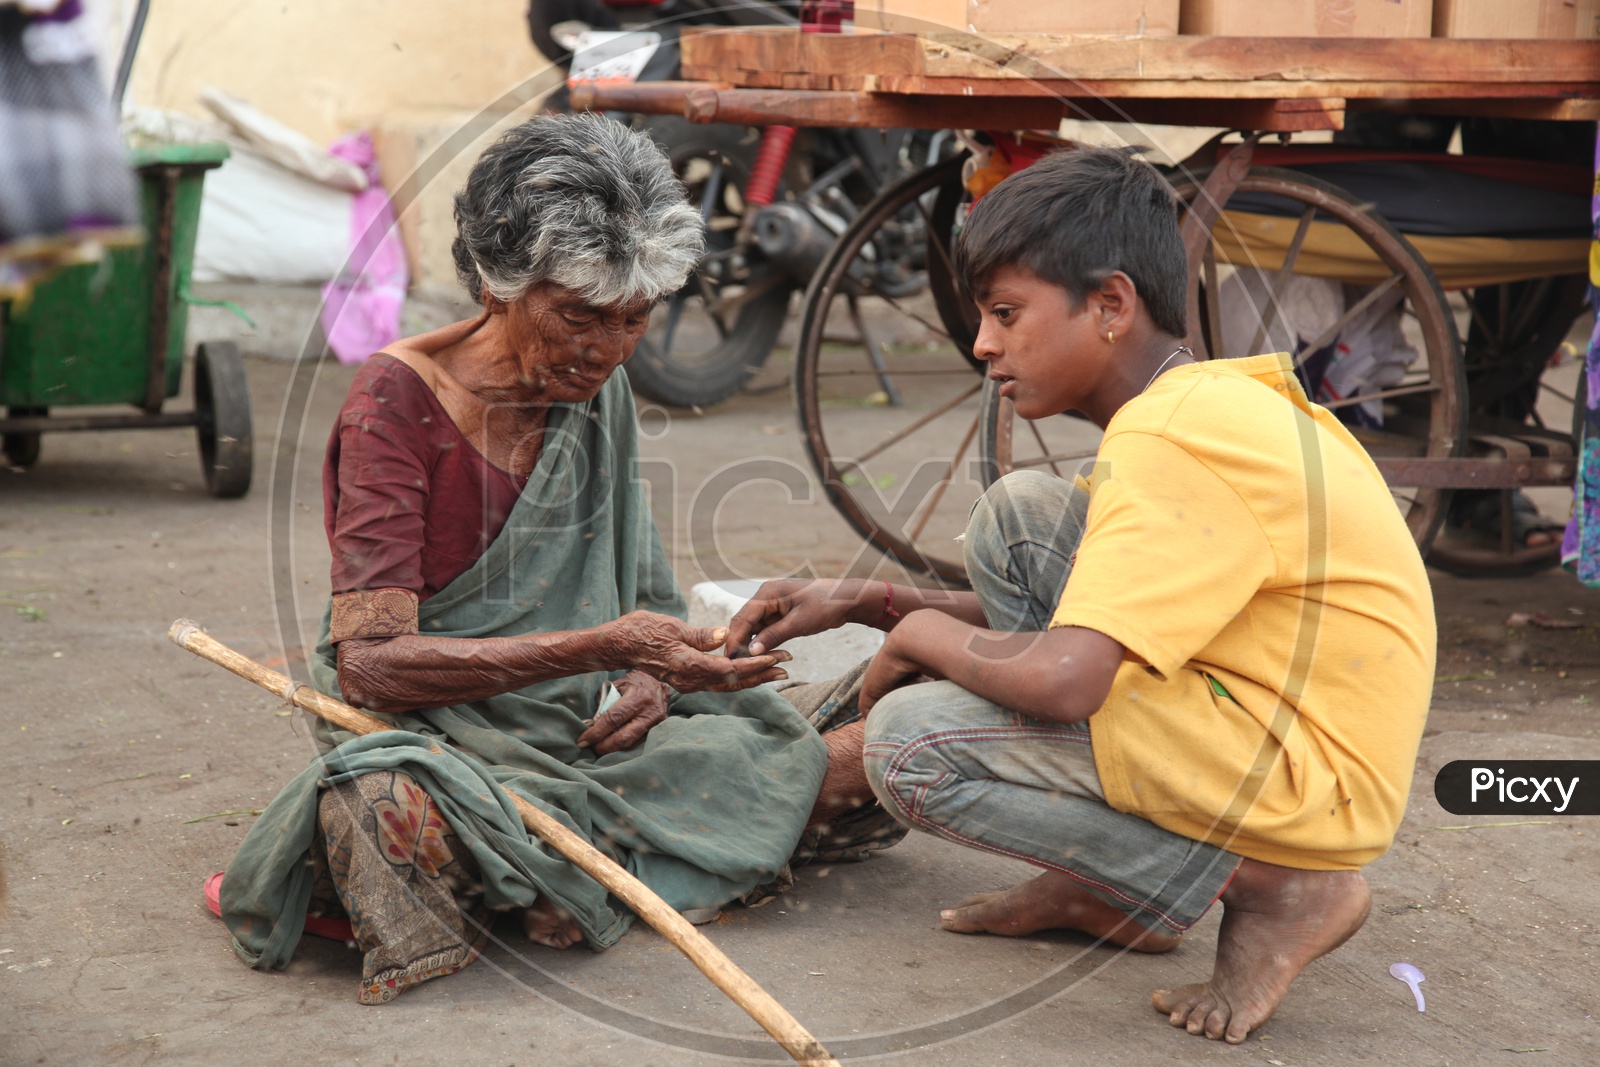 A beggar counting money along with a boy